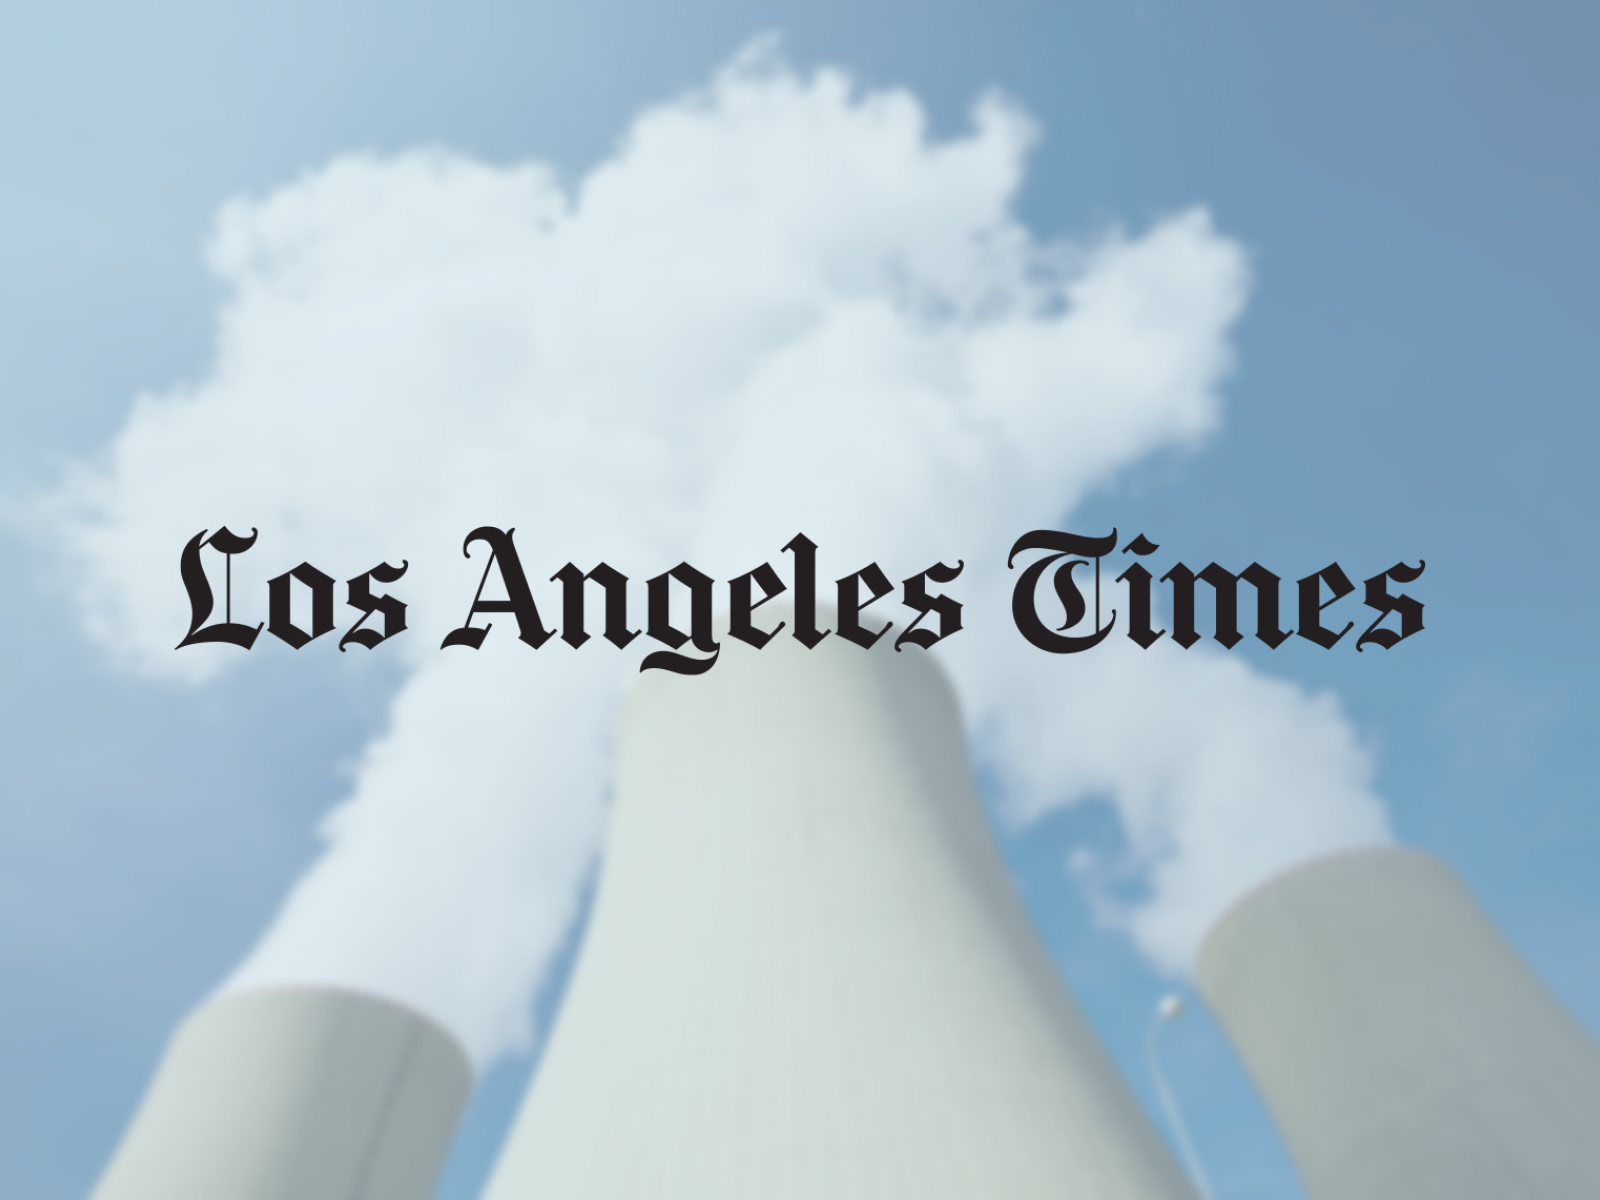 LA Times logo over nuclear power plant.